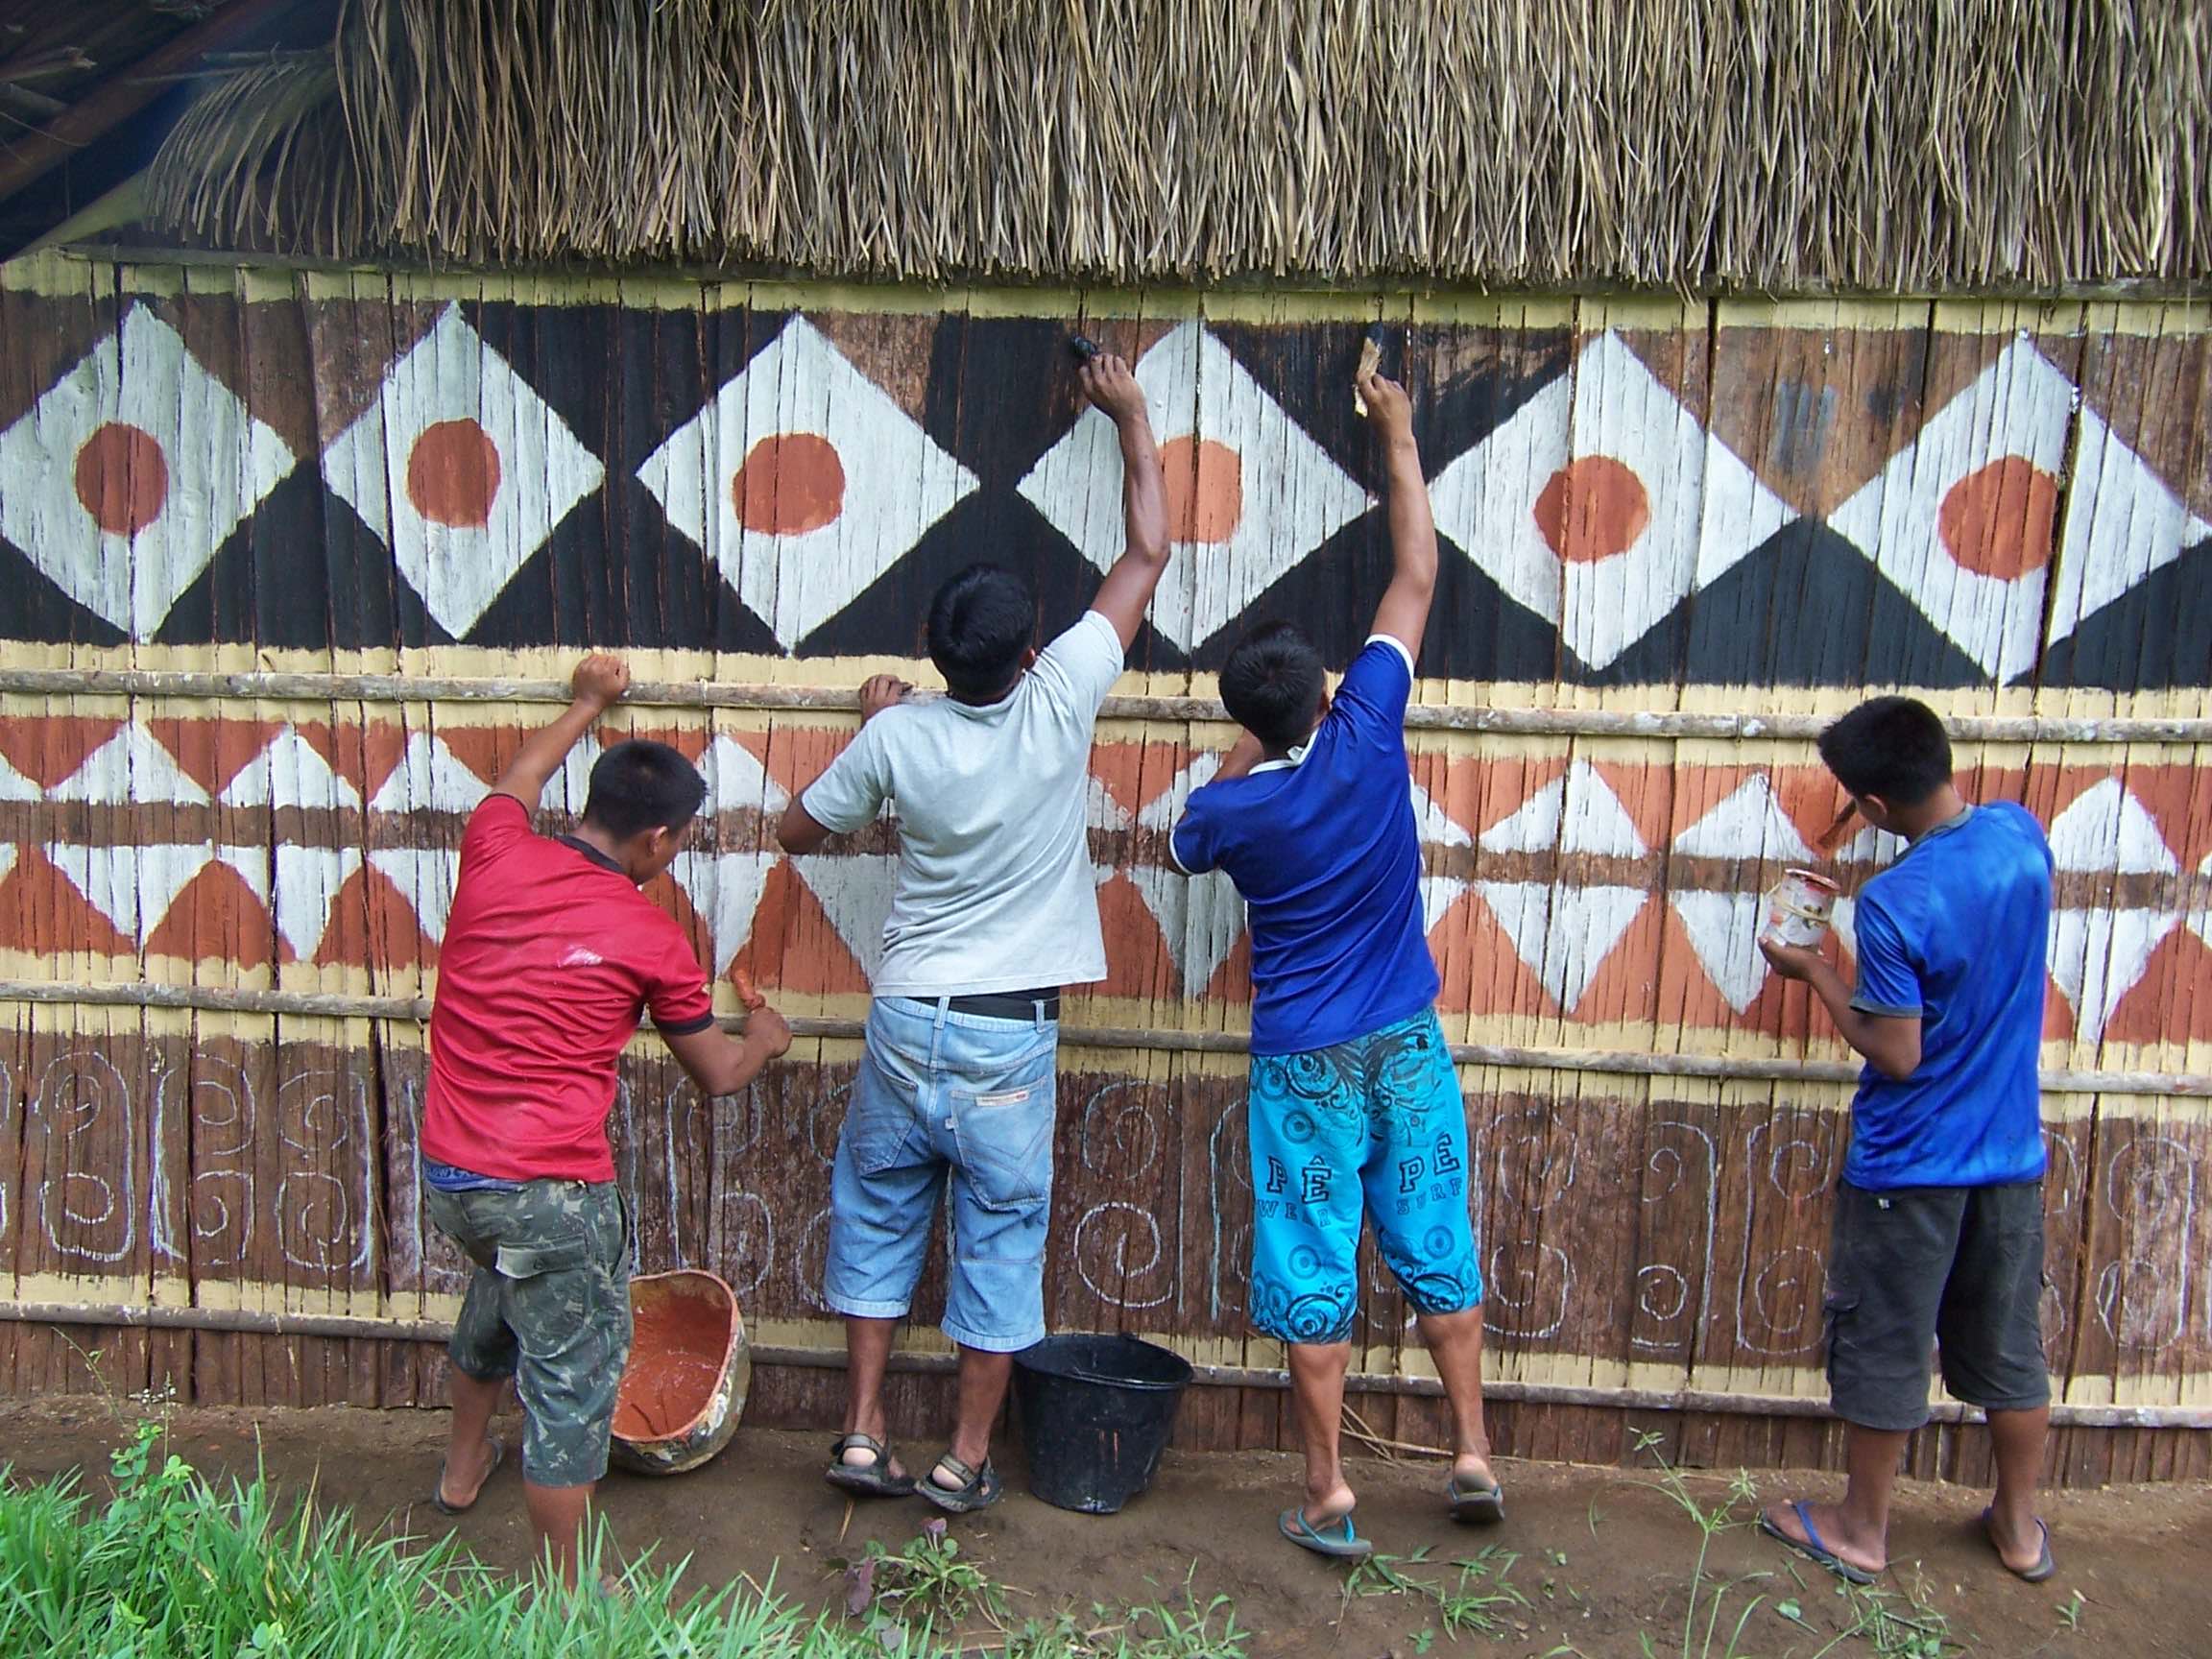 Painting the longhouse in 2009